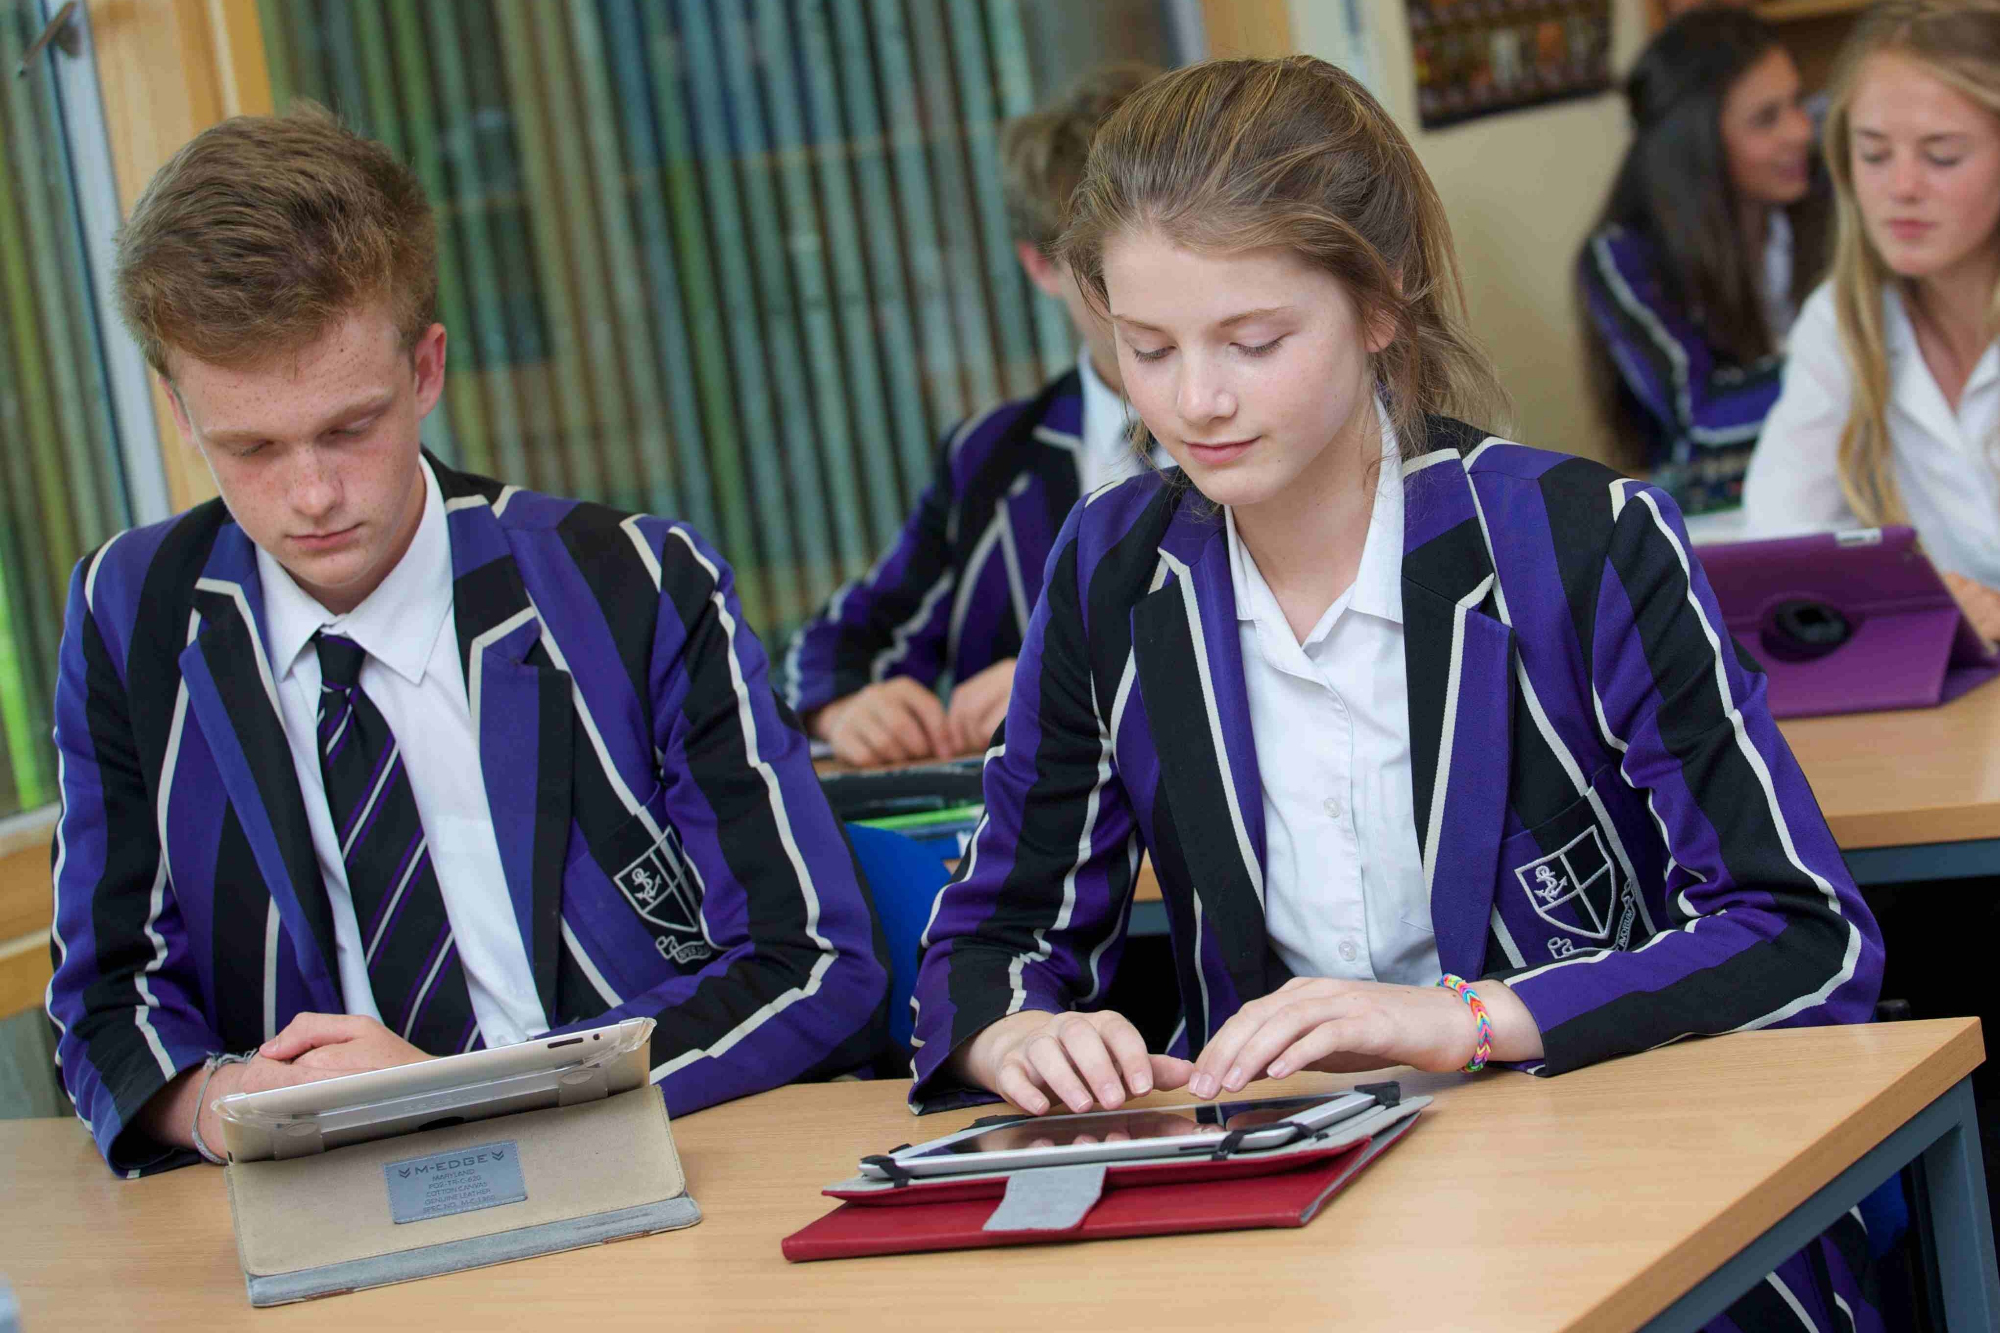 Pupils in a Digital Learning Lesson at Kimbolton School